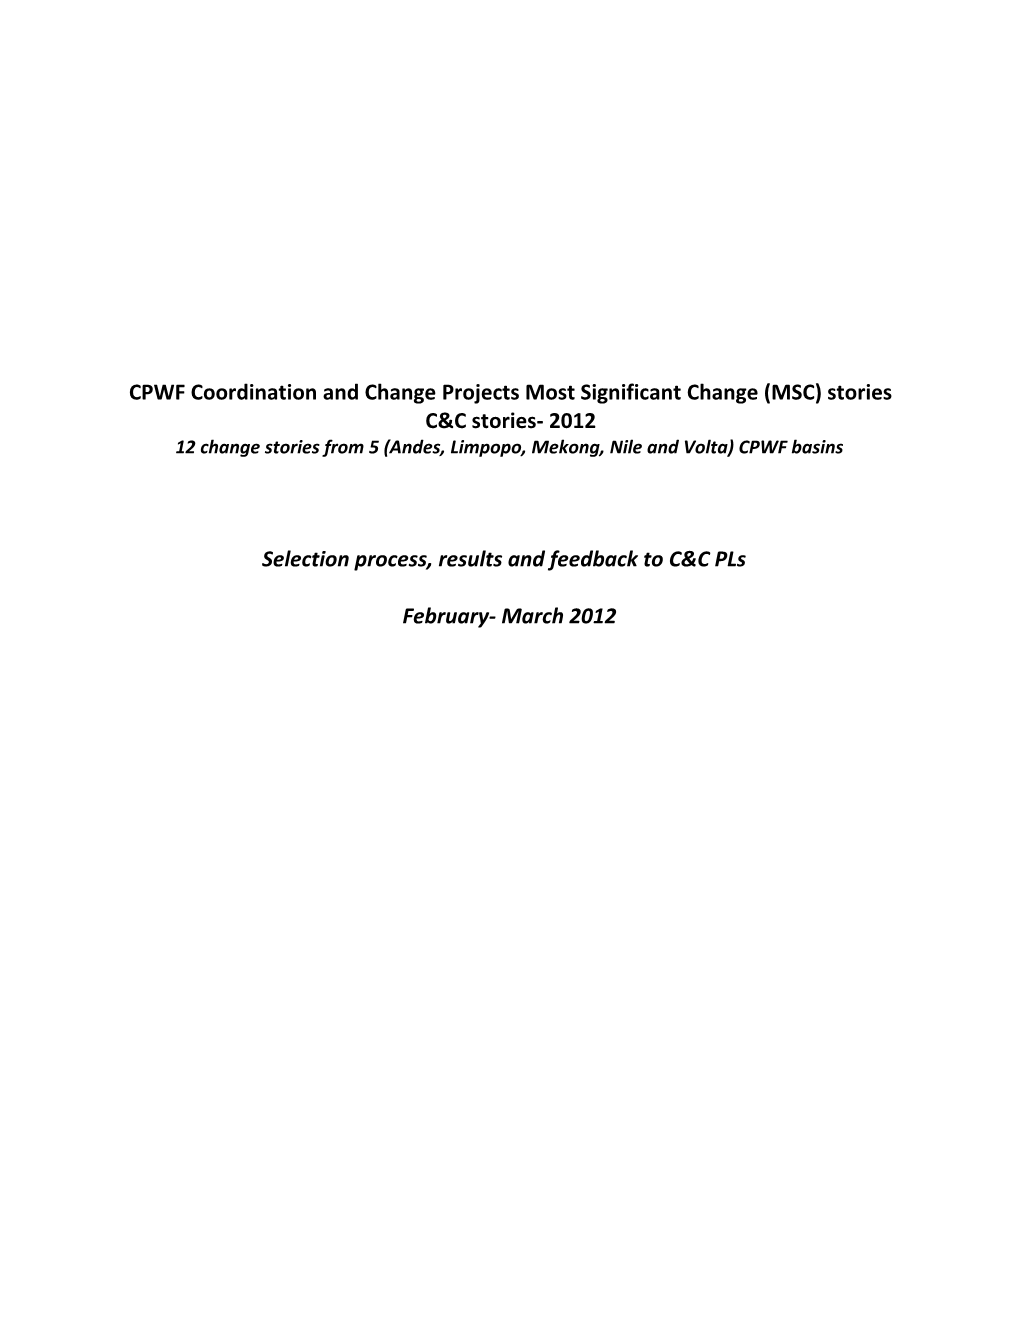 CPWF Coordination and Change Projects Most Significant Change (MSC) Storiesc&C Stories- 2012